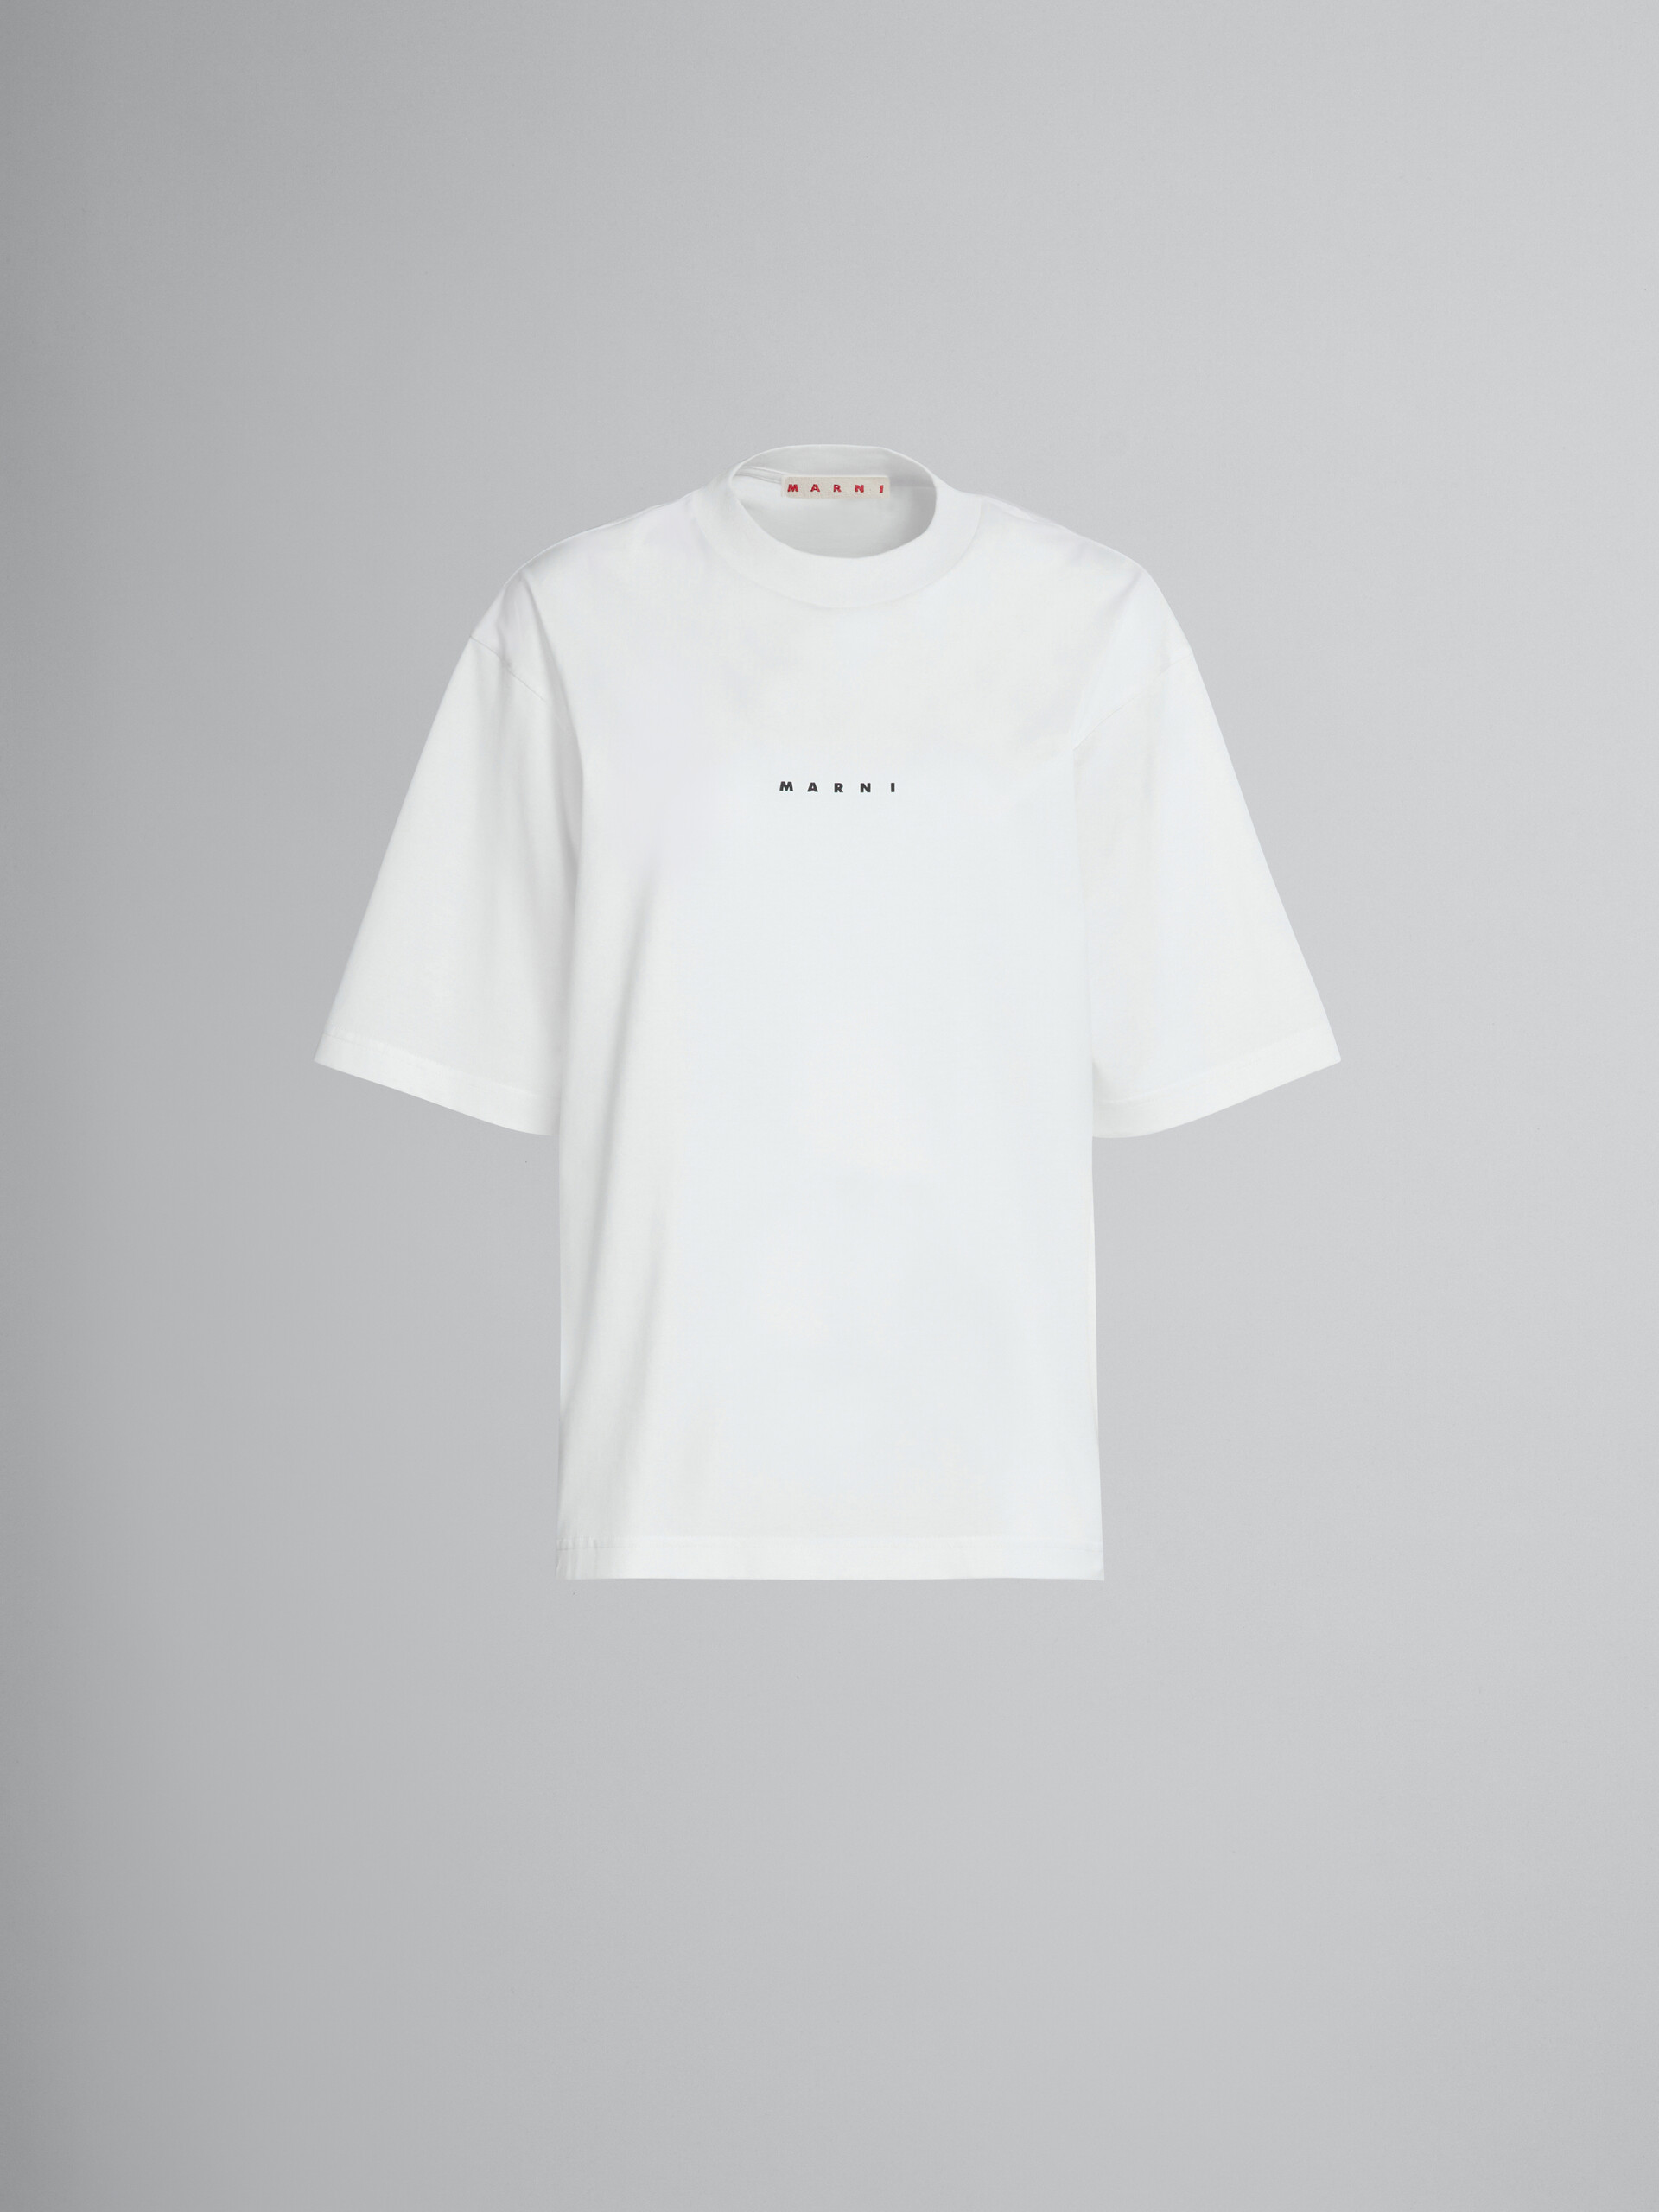 T-shirt in white bio cotton with logo - T-shirts - Image 1